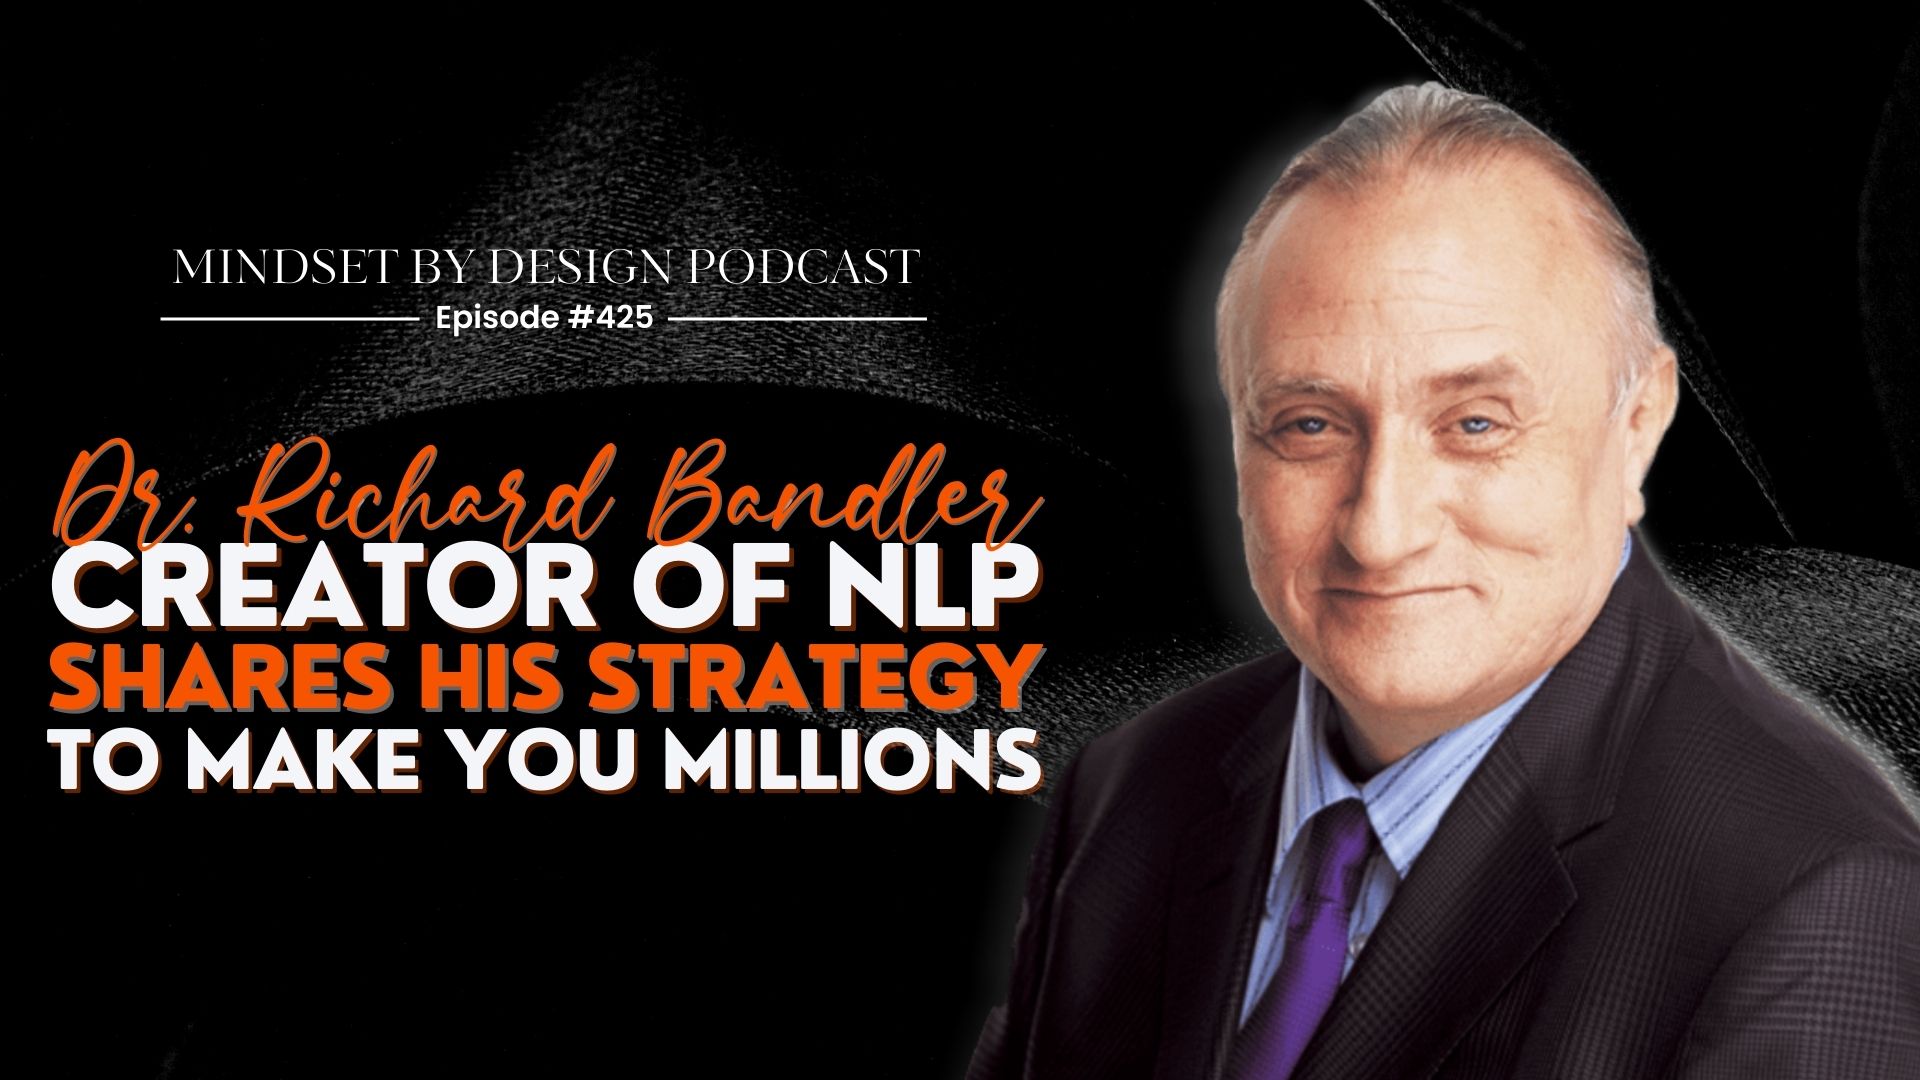 Dr Richard Bandler Creator of NLP Shares His Strategy To Make You Millions